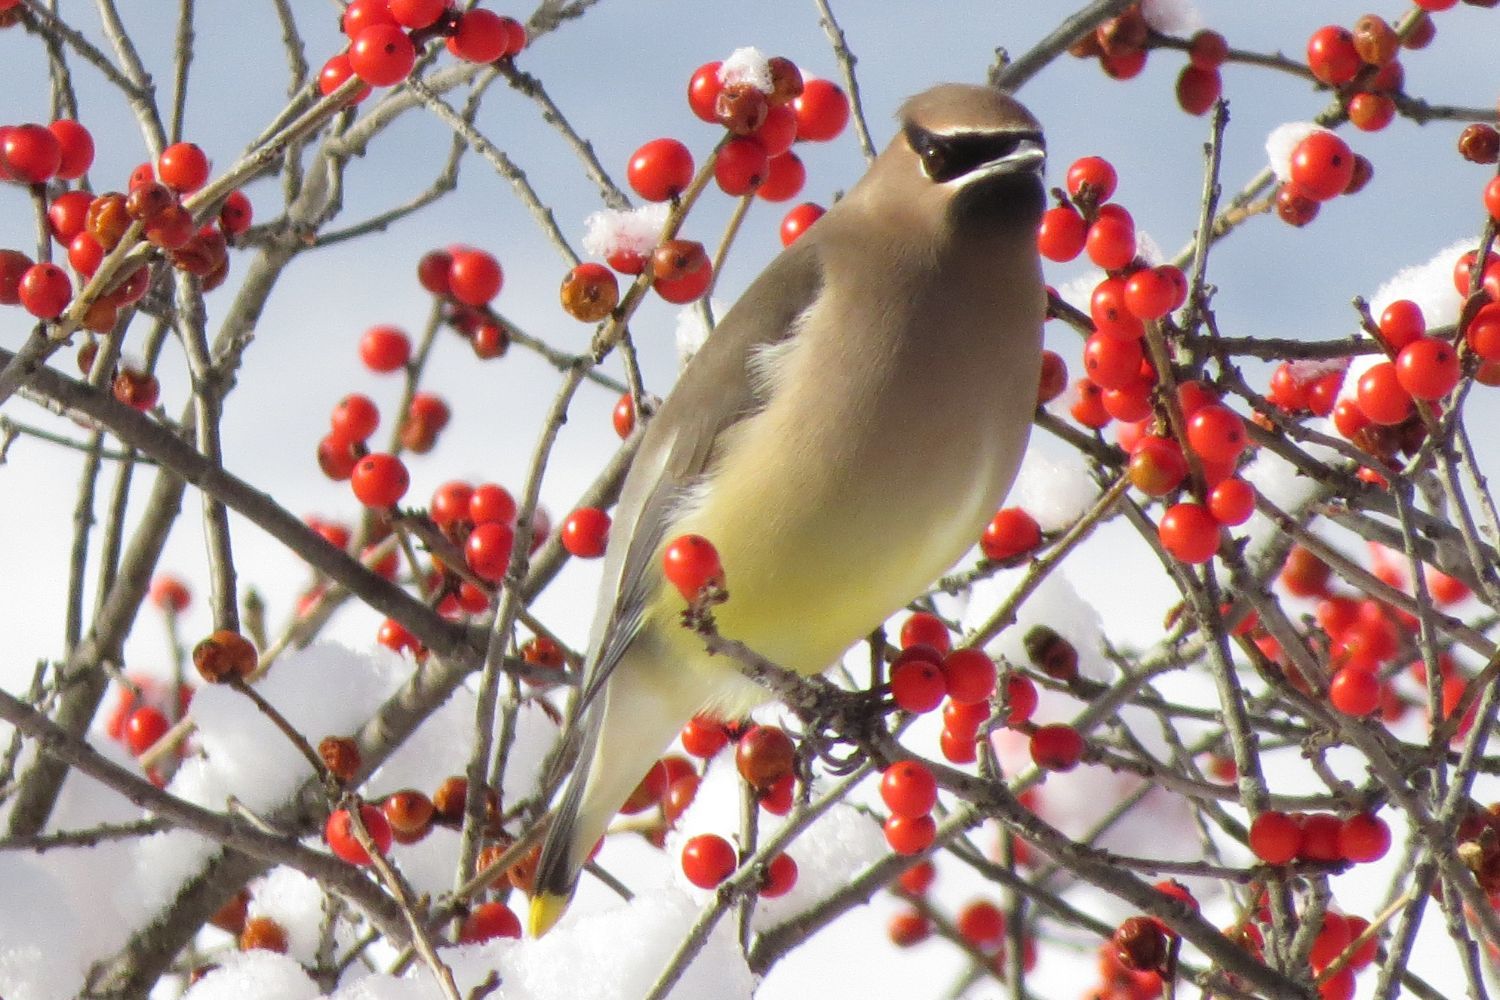 Cedar Waxwing, photo taken by Pat Demko during a past Christmas Bird Count